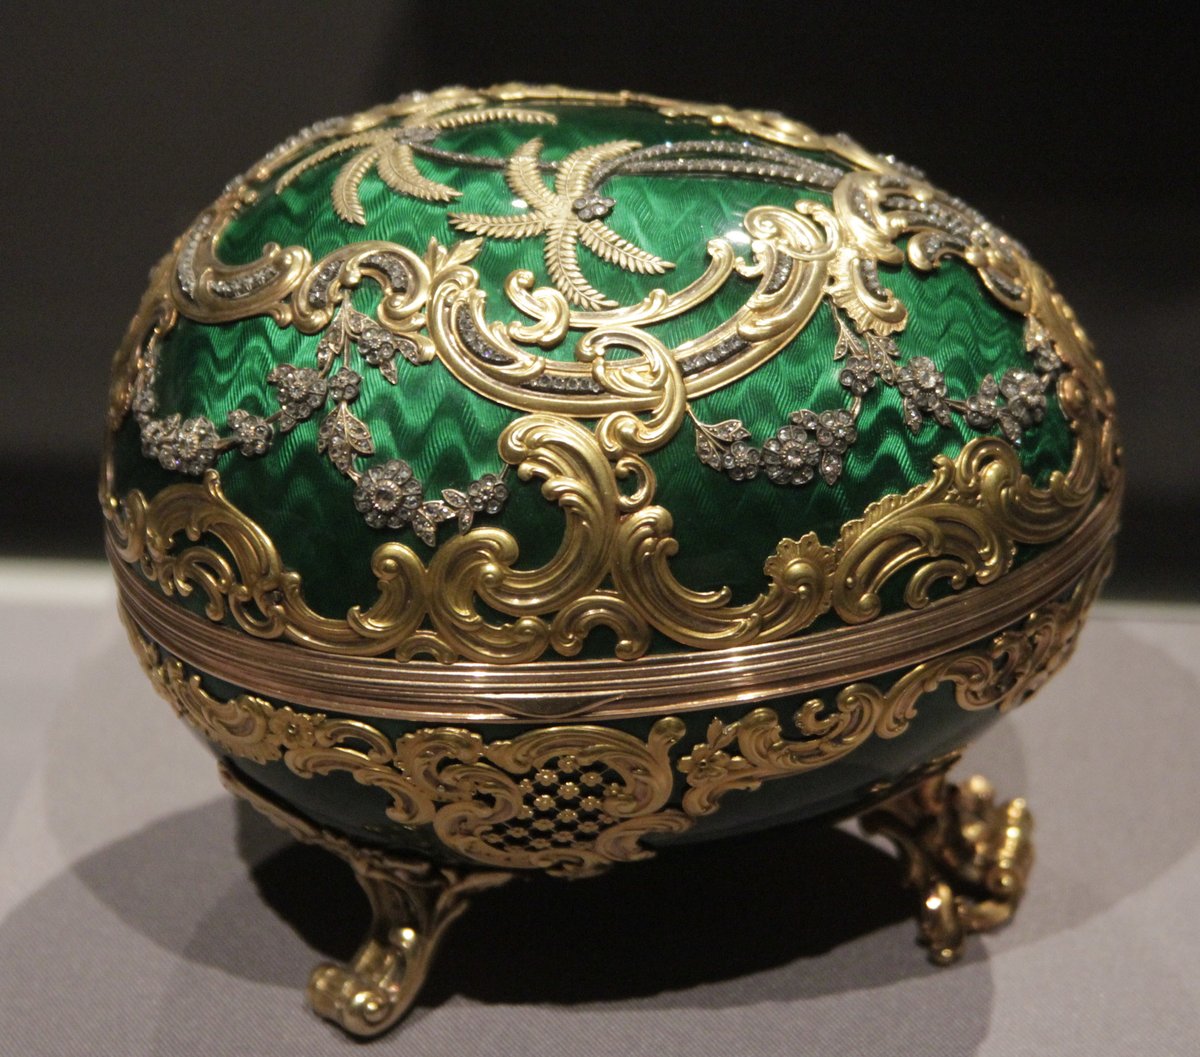 The Rocaille egg is one of the Fabergé eggs created in the workshop of Peter Carl Fabergé for the wealthy Russian industrialist Alexander Kelch who presented it to his wife as an Easter gift in 1902.